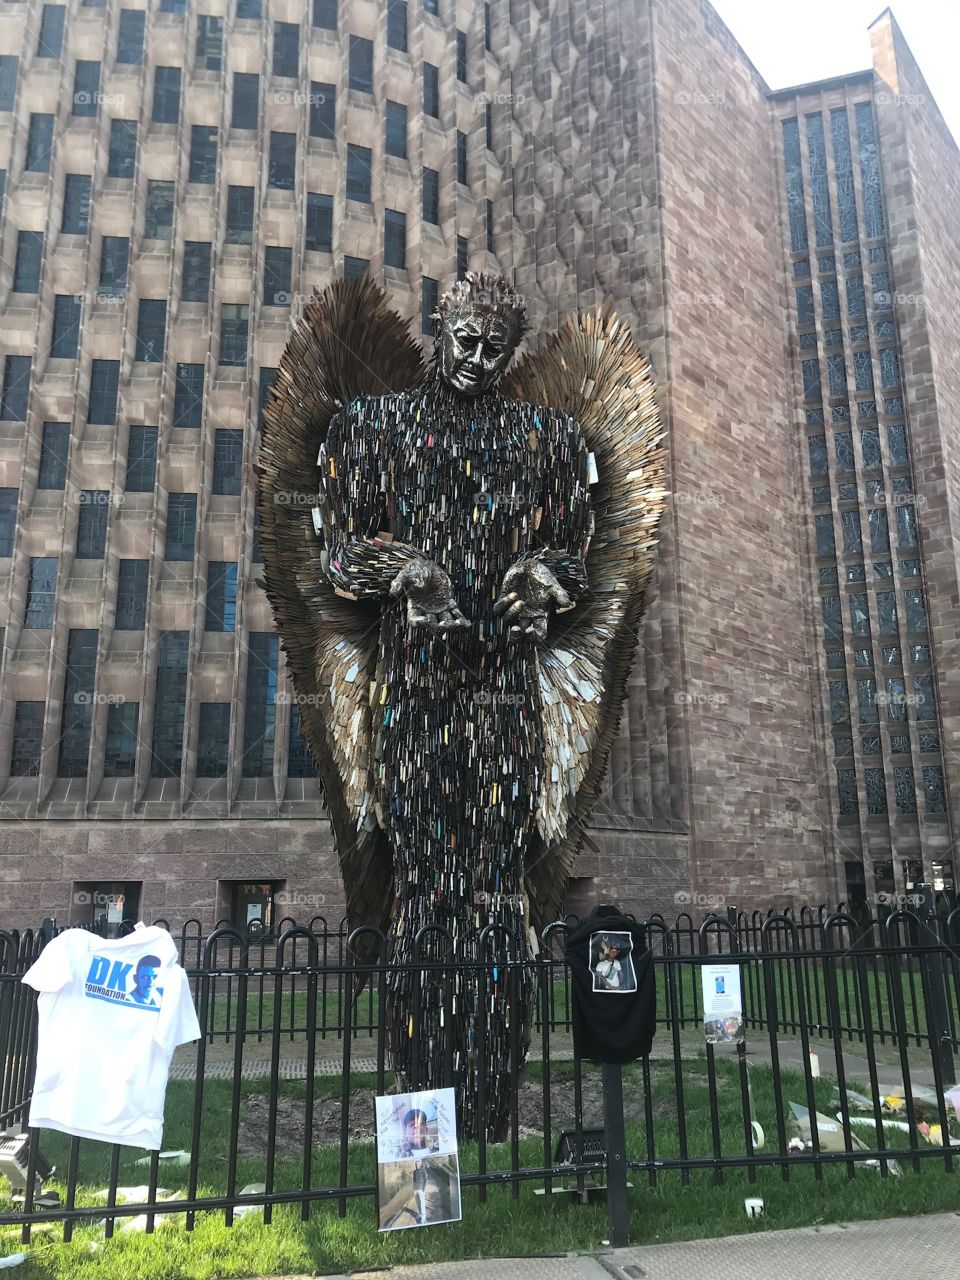 -The knife angel- A statue made of 100,000 knives that have been ether confiscated or handed in to the police. This statue is here to tackle knife crimes and make people aware of the cruel situation.